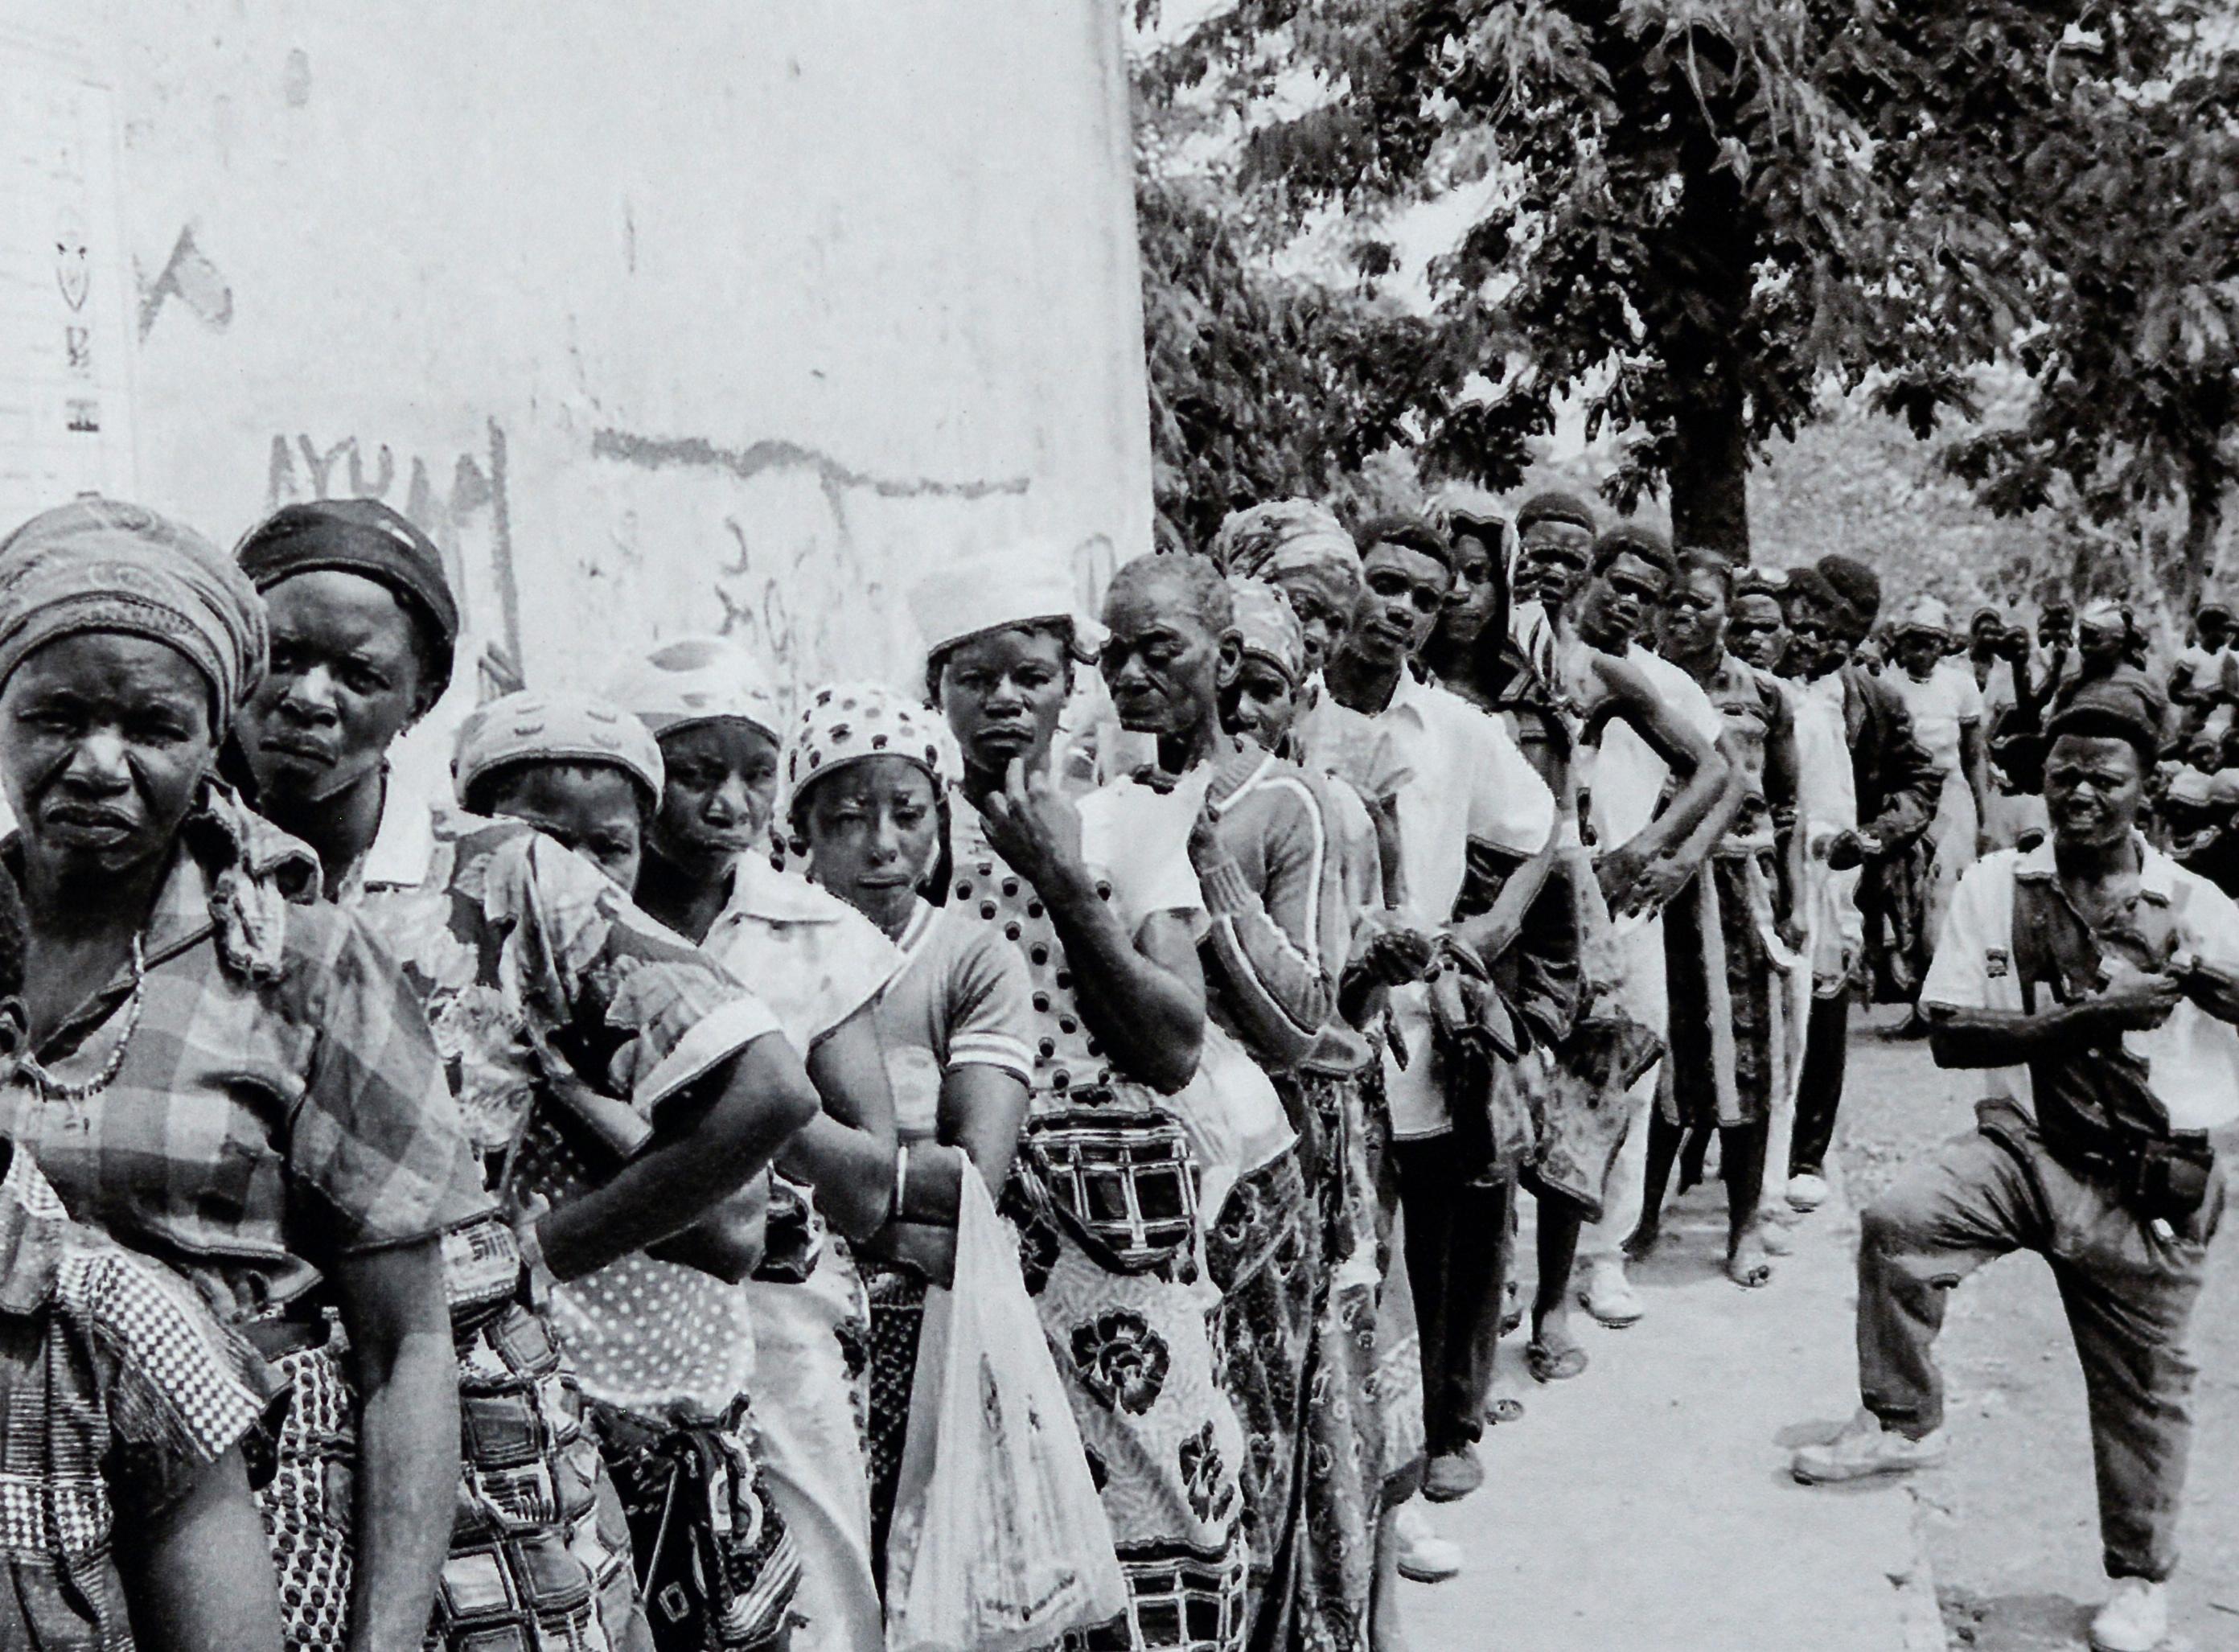 Angola Votes, c. 1992 (printed c. 2014). Inkjet Print on Hahnemuhle Fine Art Baryta Satin Paper, 1/1

Tony Figueira (1959 – 2017)Tony Figueira was born in 1959 in Huambo, Angola. At the age of seven his family moved to Windhoek, Namibia. Figueira’s